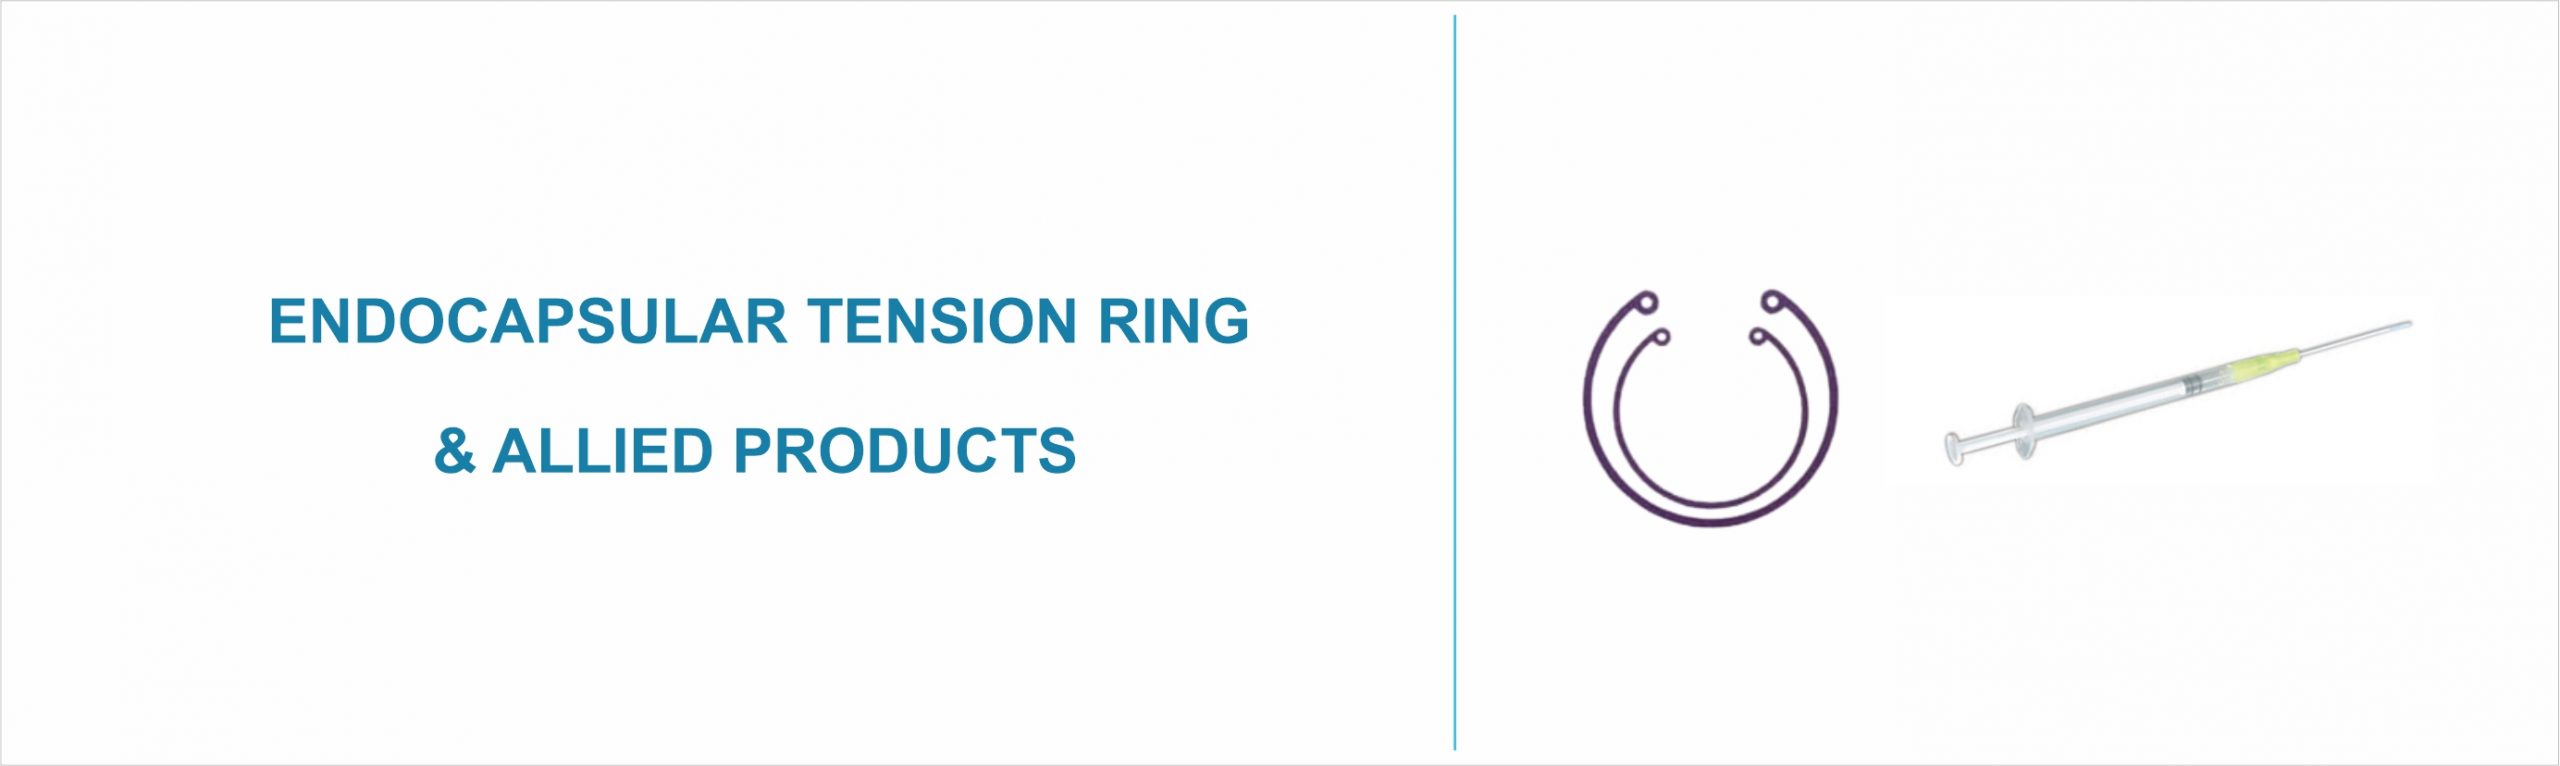 Endocapsular Tension Ring & Allied Products